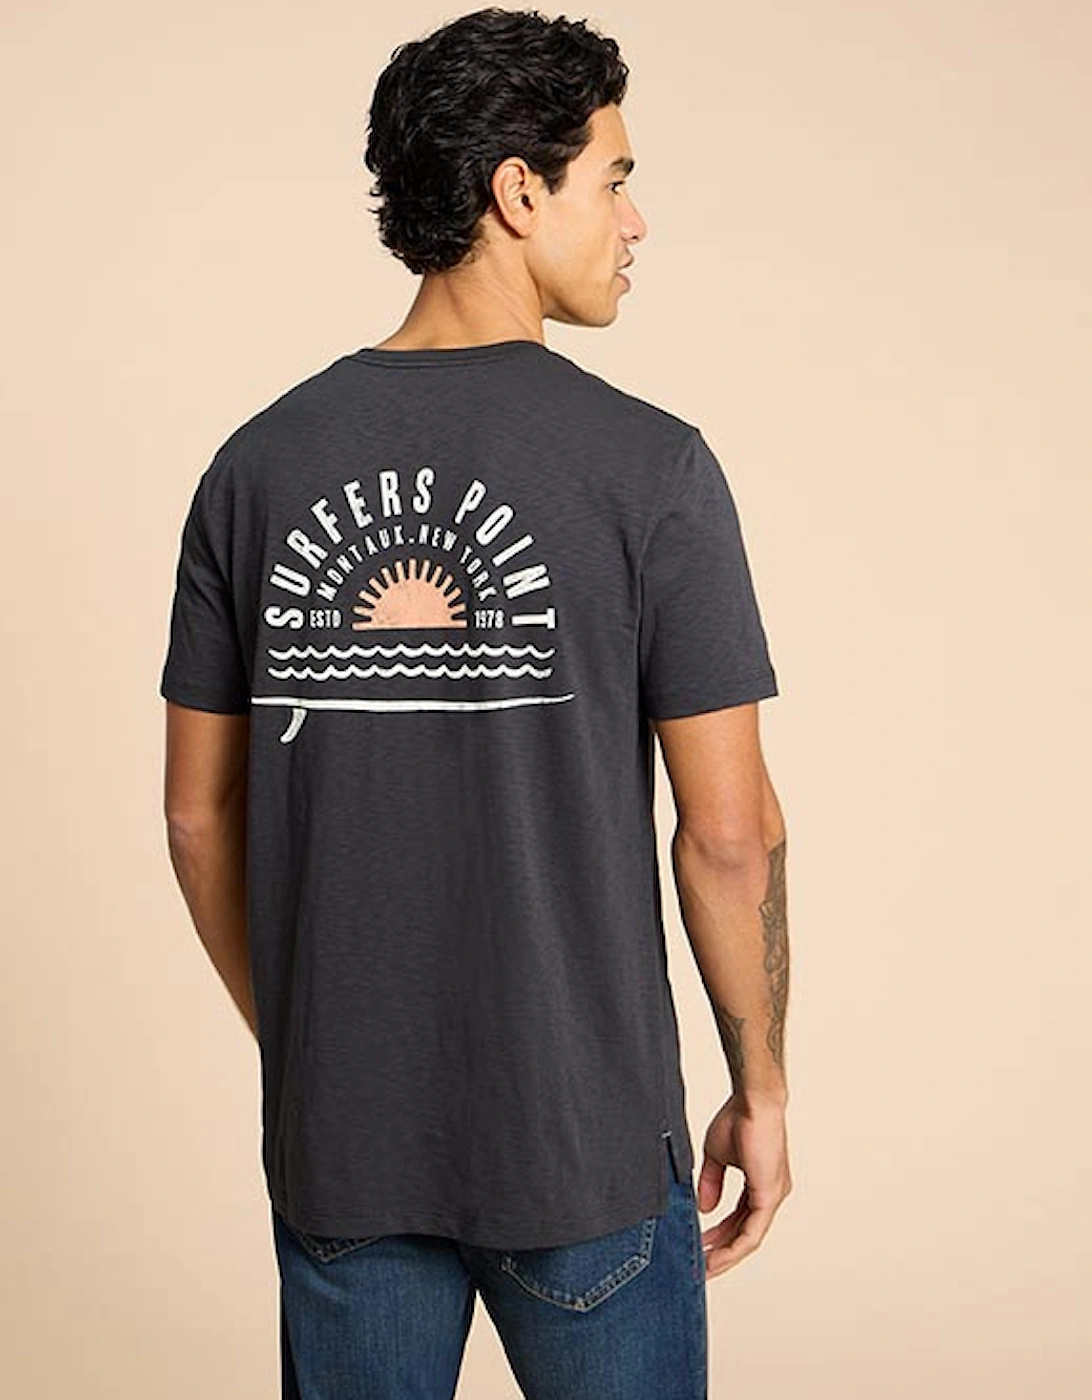 Men's Surfer's Point Graphic Tee Navy Print